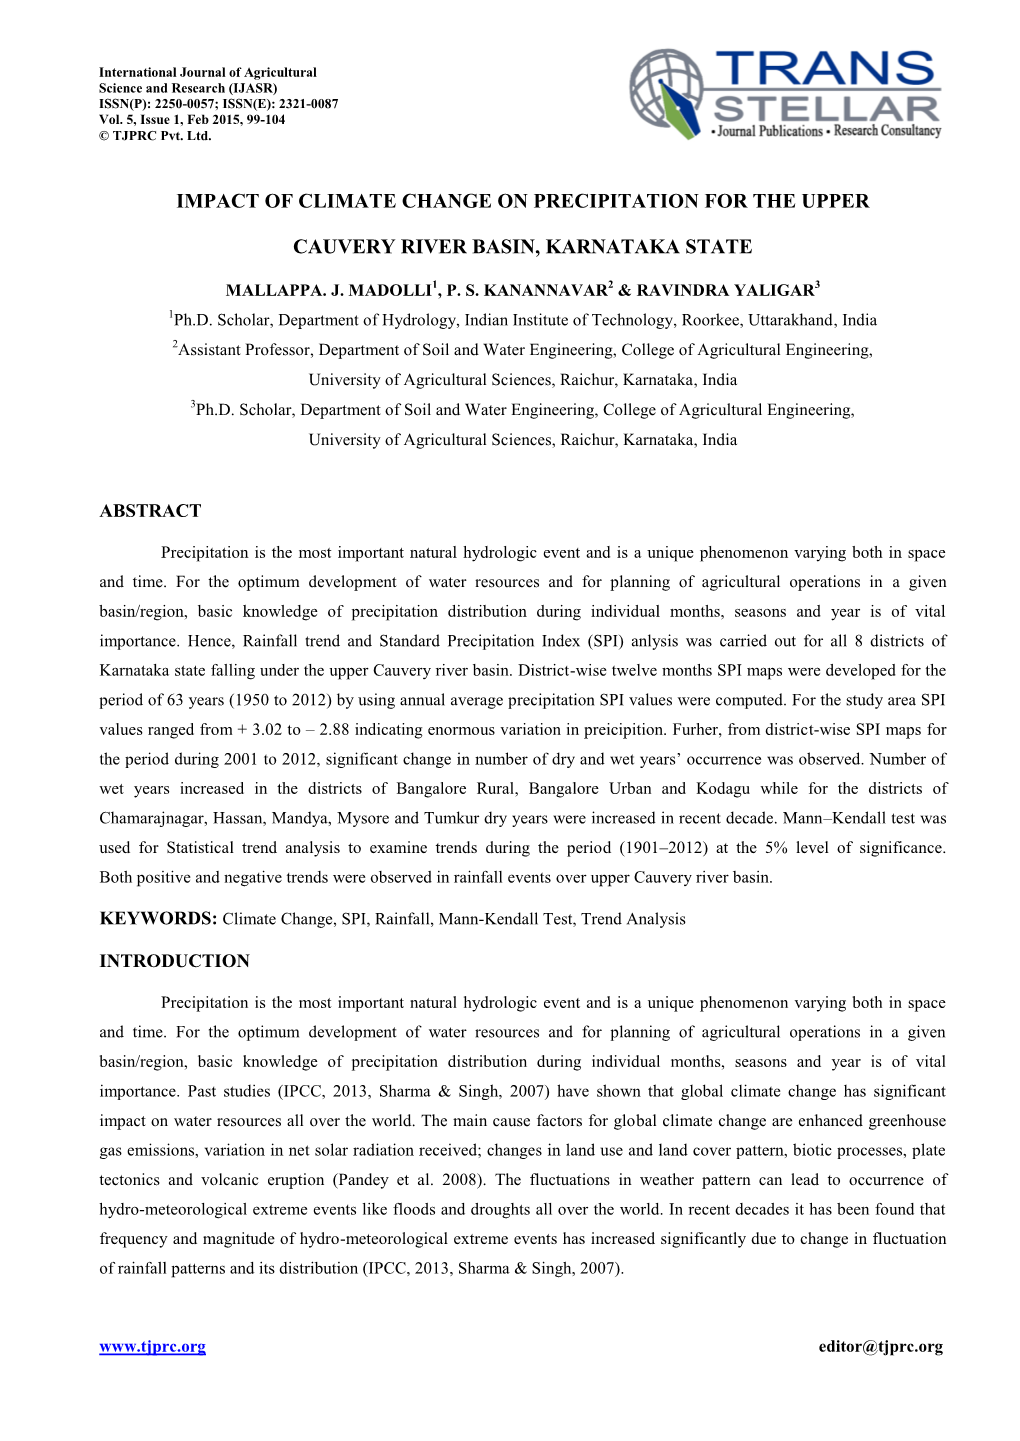 Impact of Climate Change on Precipitation for the Upper Cauvery River Basin, Karnataka State 101